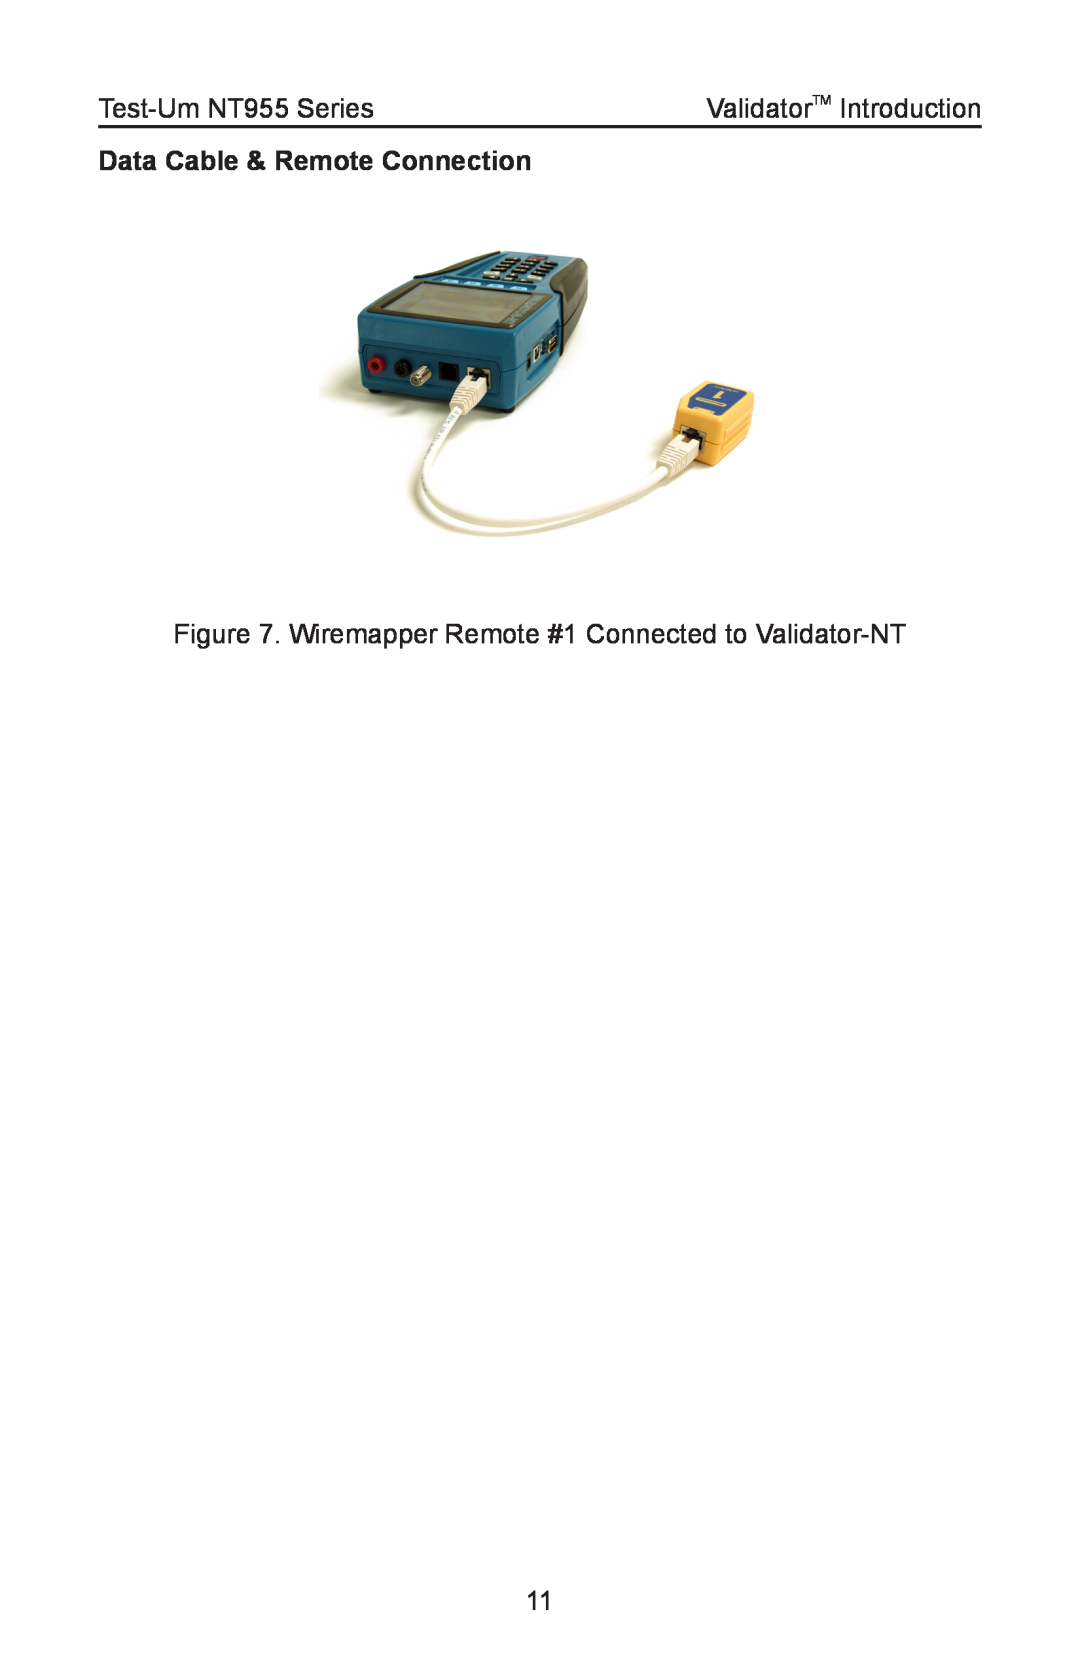 Test-Um operating instructions Data Cable & Remote Connection, Test-Um NT955 Series, ValidatorTM Introduction 